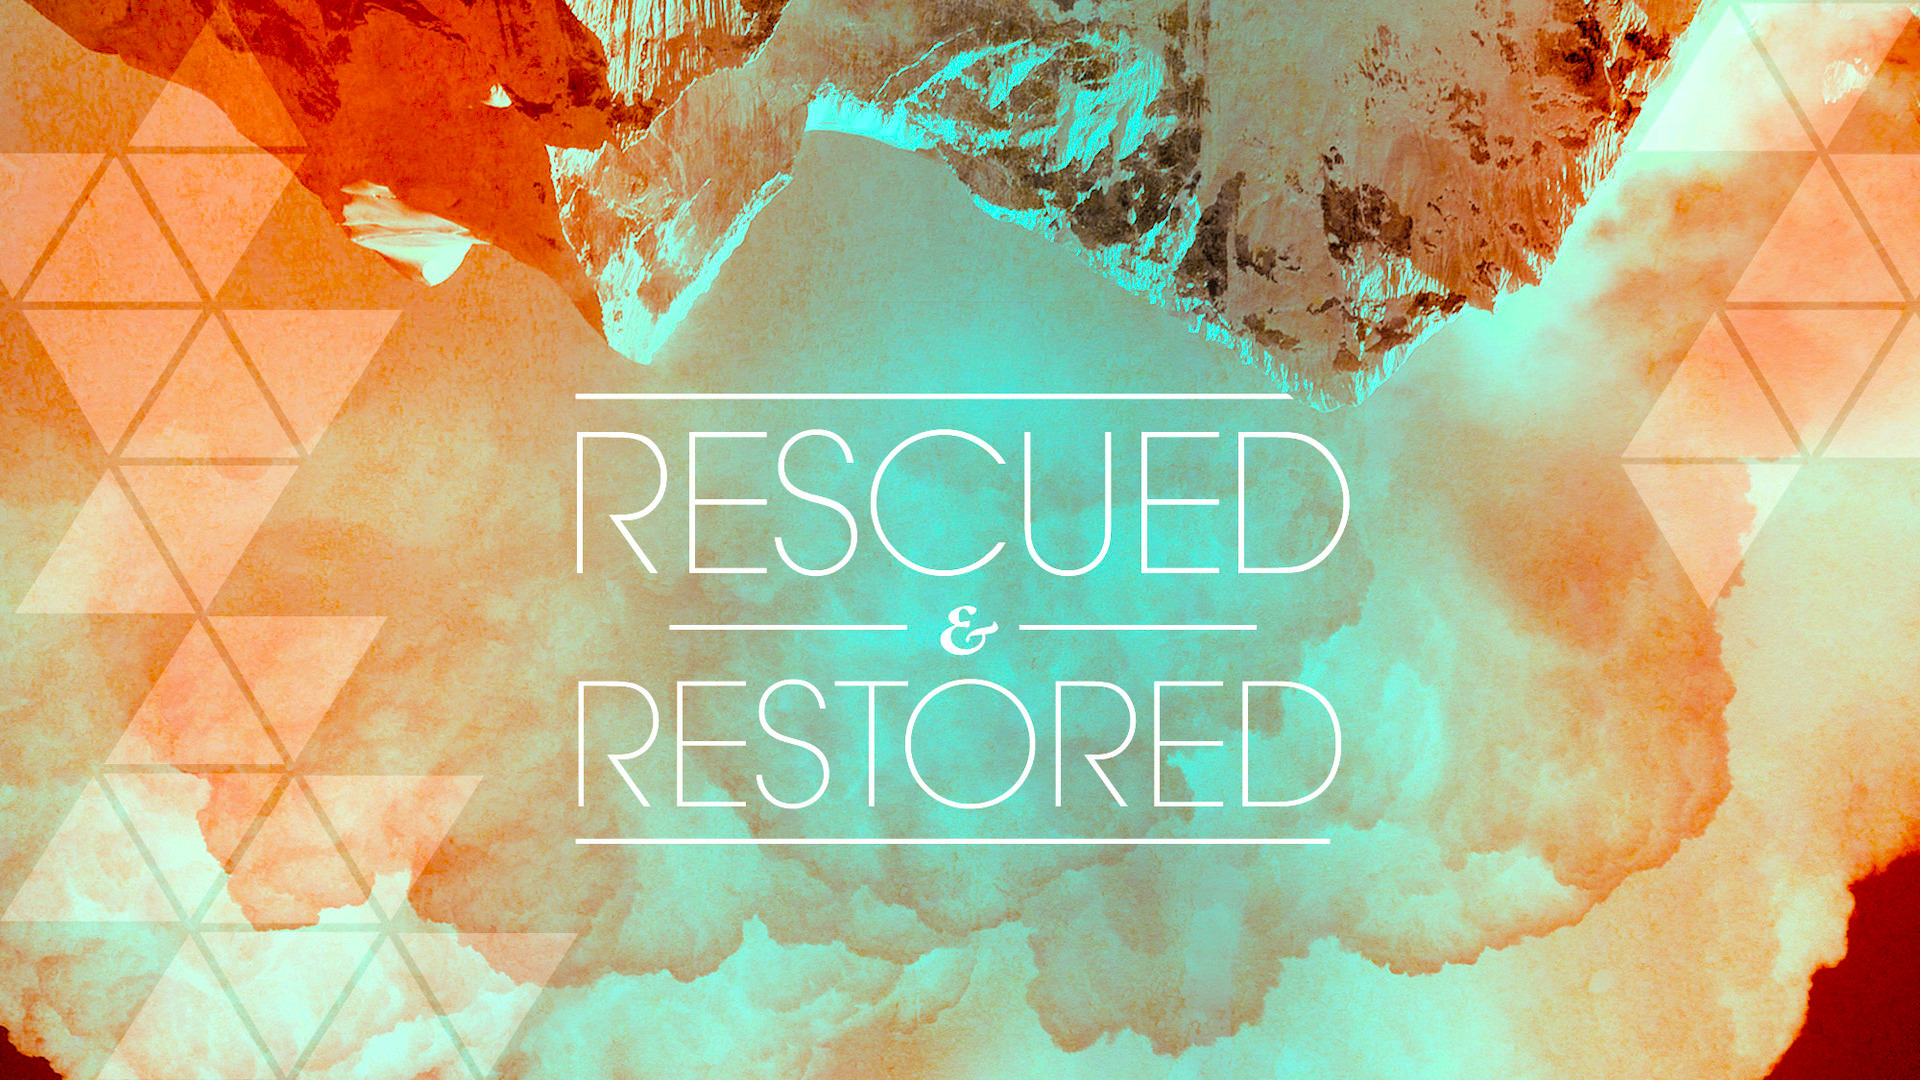 07-10-16 | Rescued & Restored | How Do I Change? | Mark Anderson